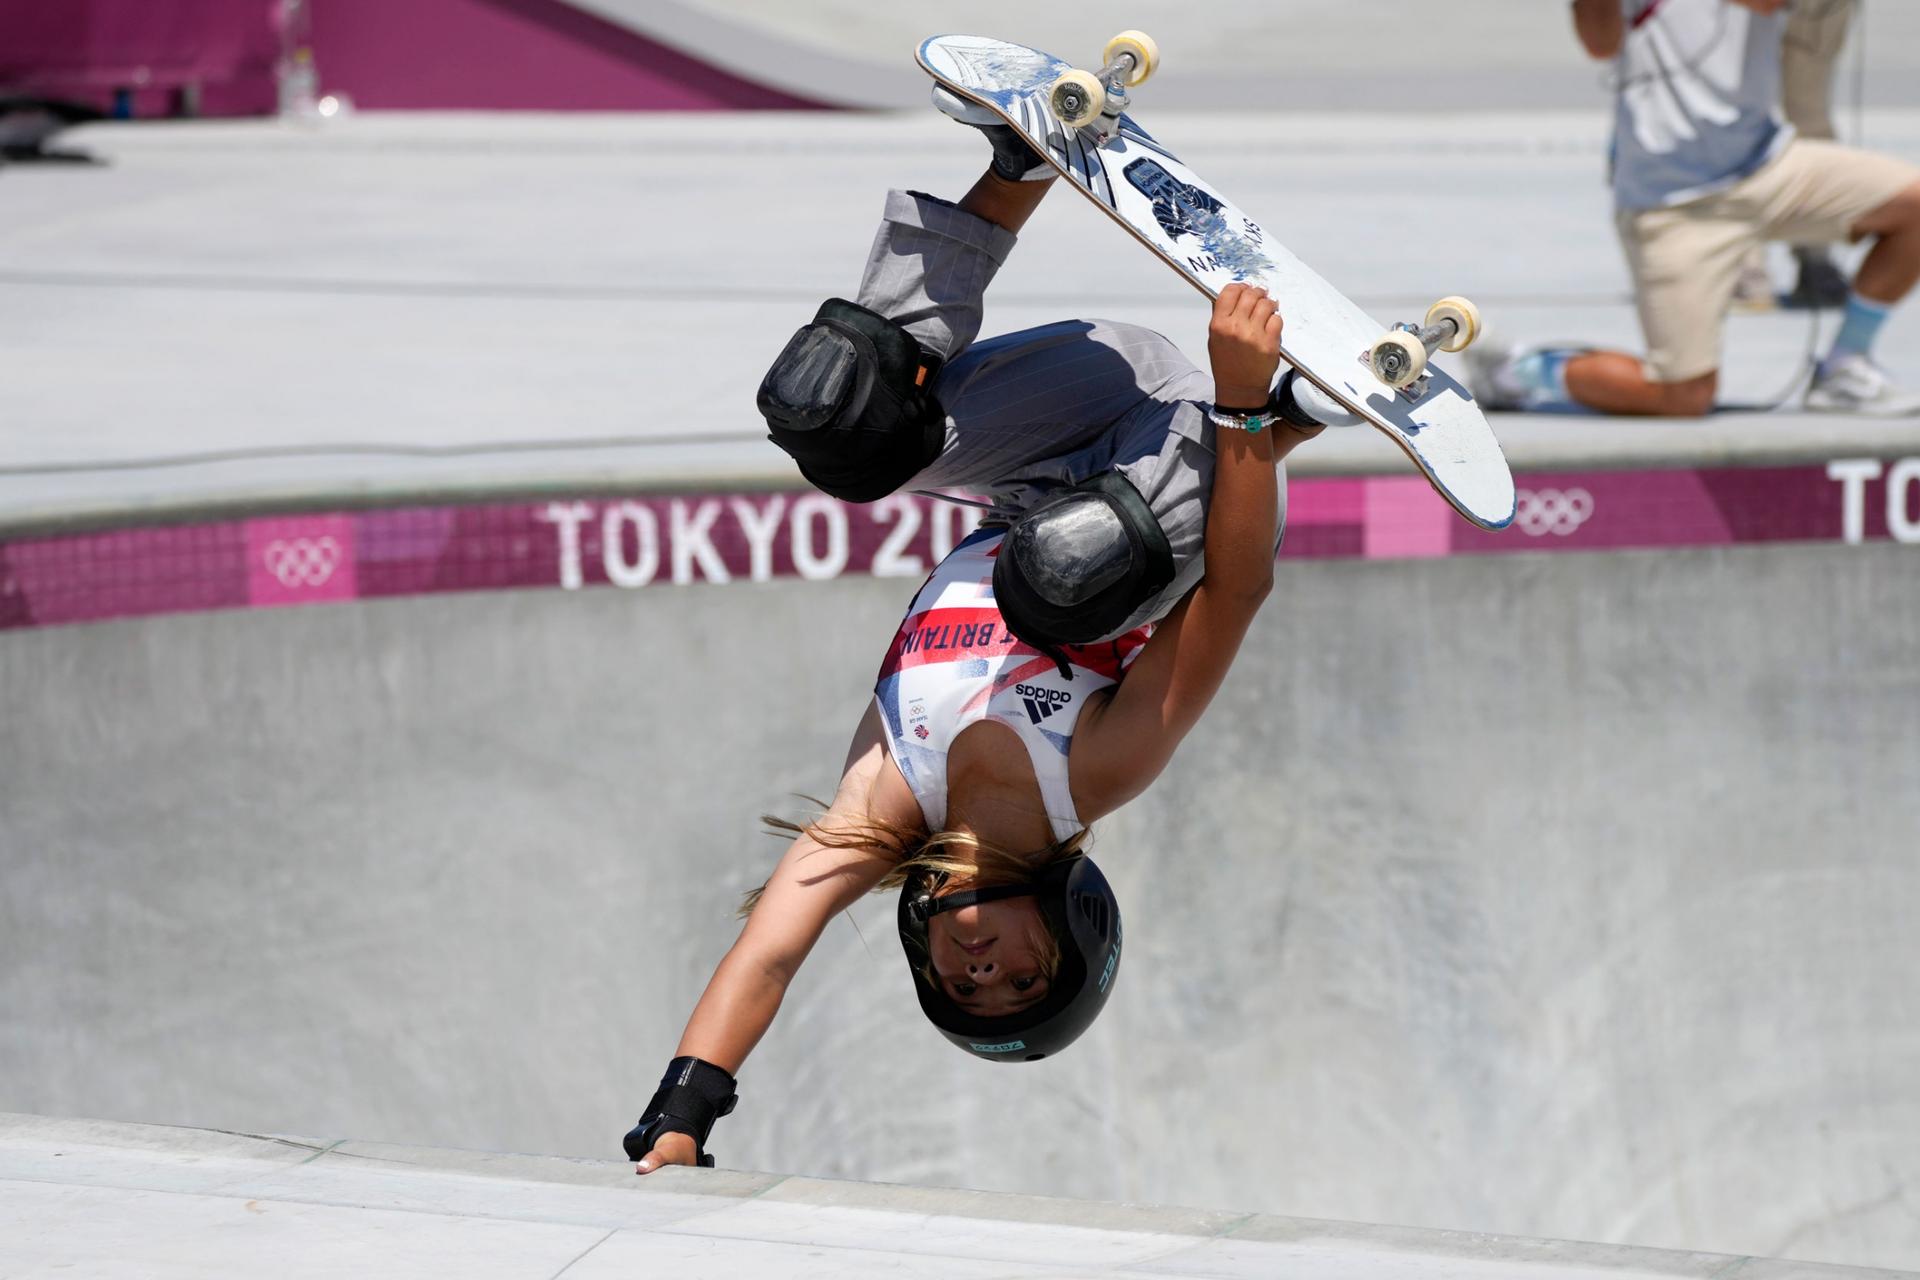 Sky Brown of Britain is shown upside down with her skateboard held against her feet and her right arm holding on to the edge of the park bowl.